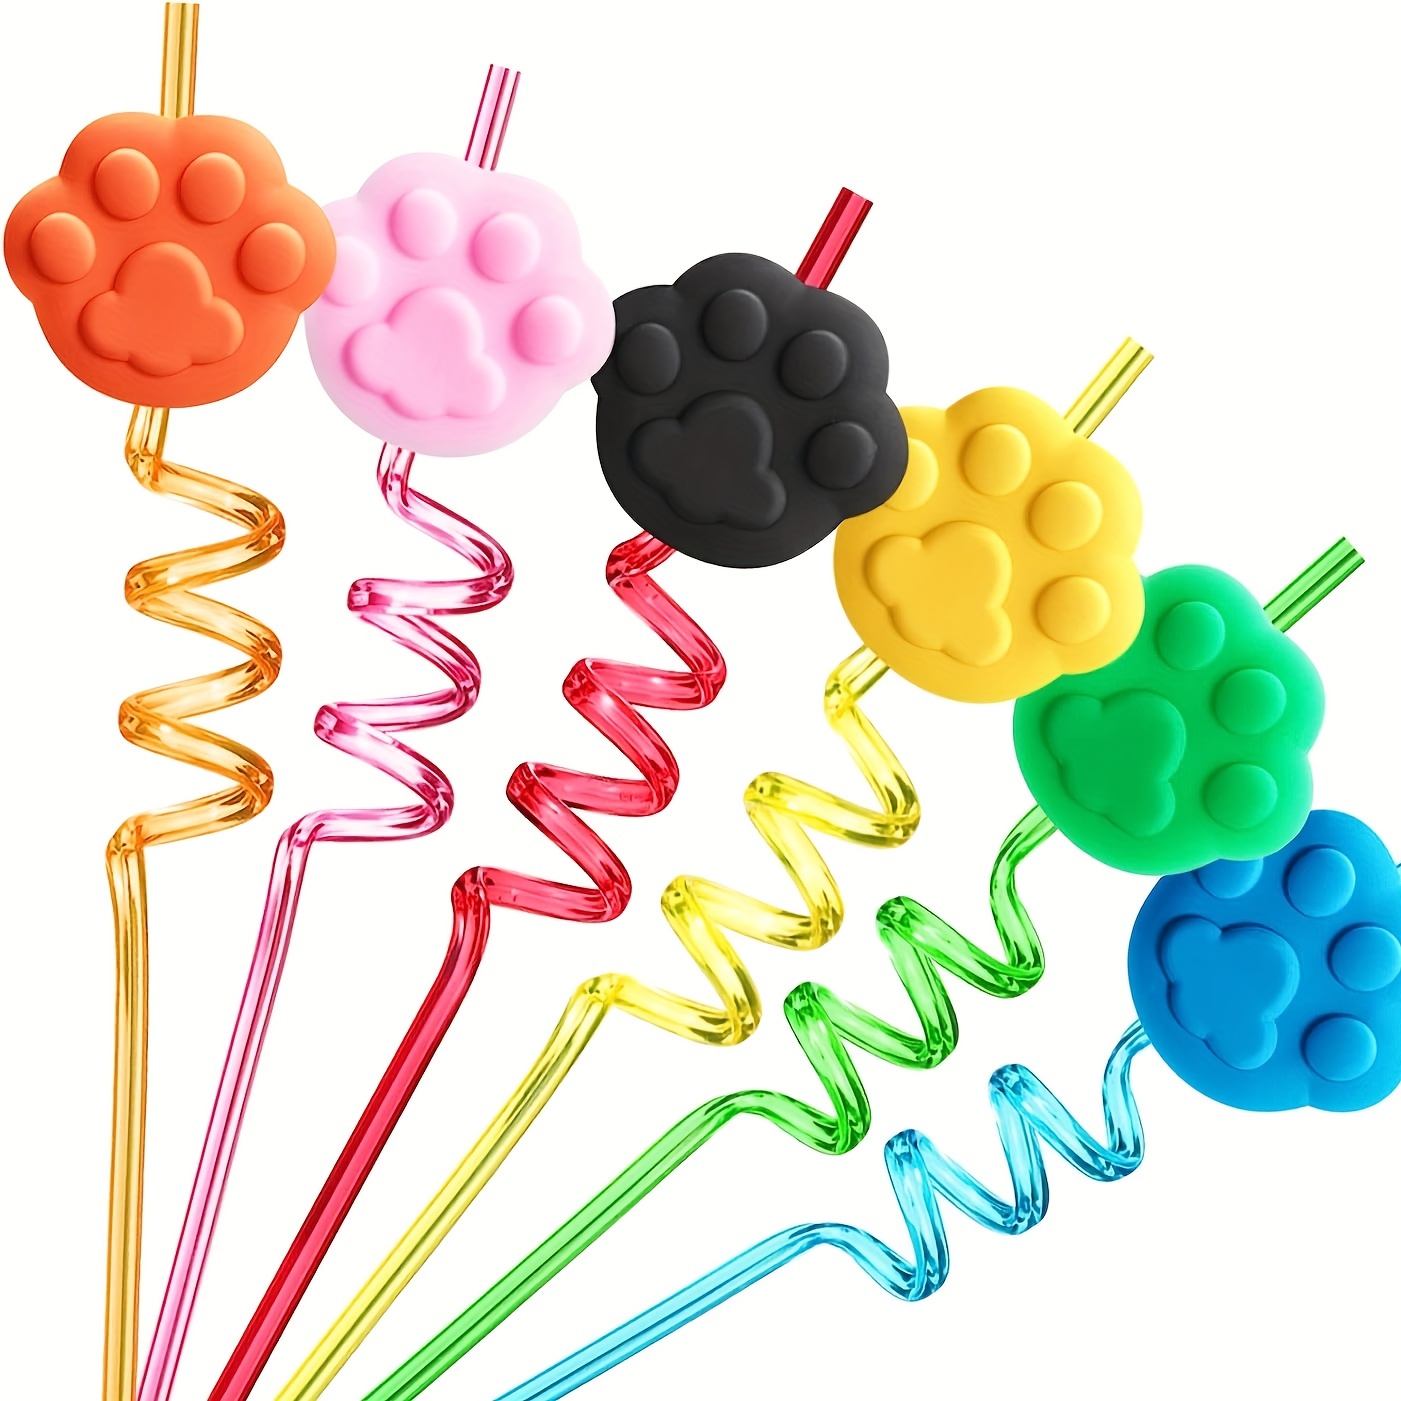 

4pcs Dog Paw Print Drinking Straws Patrol Theme Party Straws For Pet Dog Puppy Pals Cat Birthday Party Supplies Decorations Favors Favors Gifts